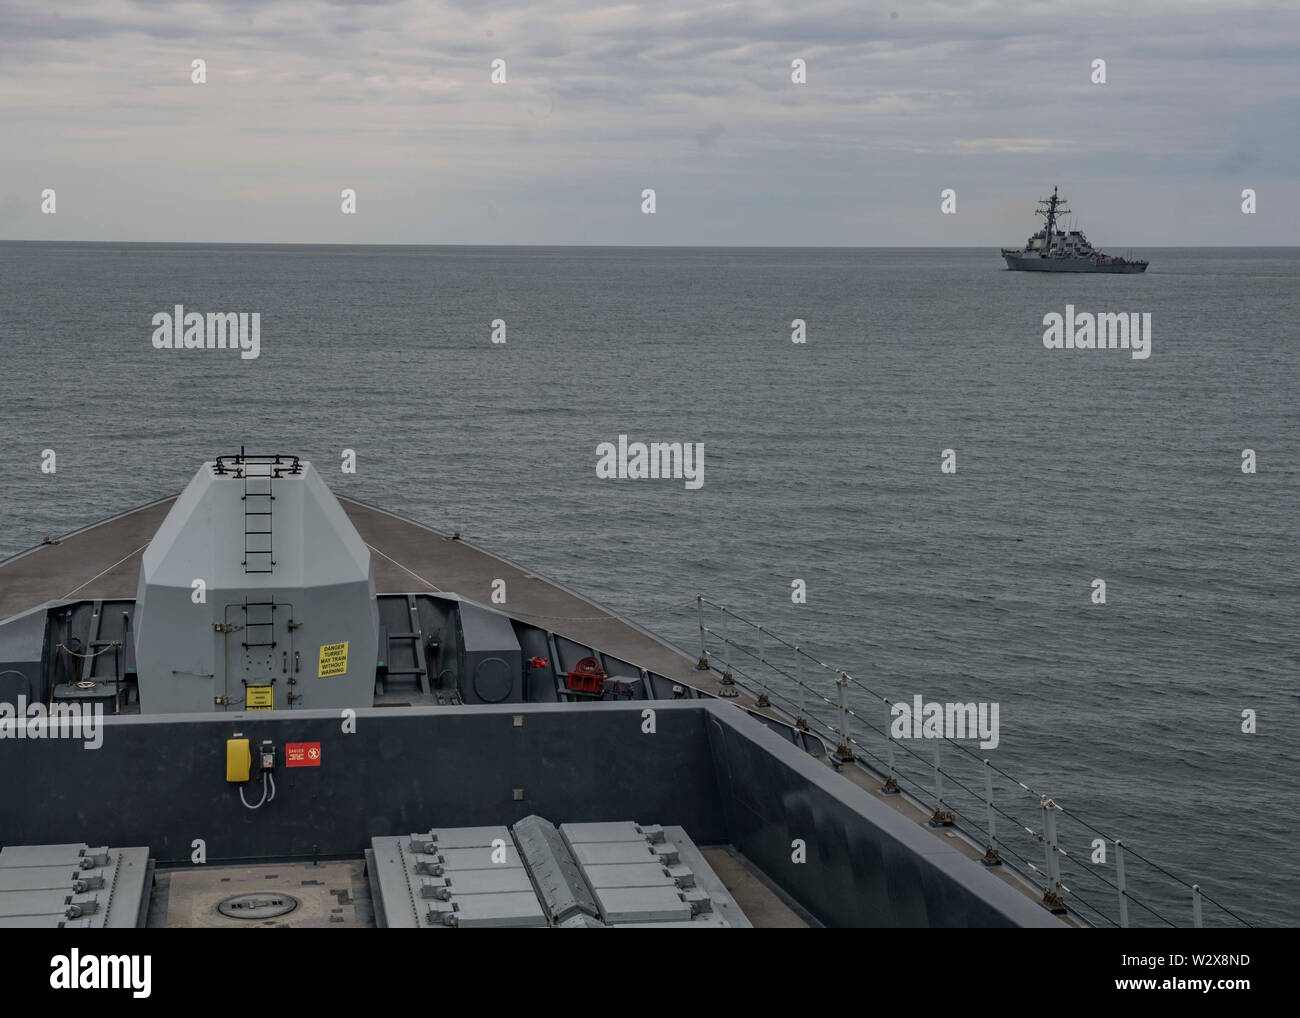 190709-N-TI693-0192    BLACK SEA (July 9, 2019) - The Arleigh Burke-class guided-missile destroyer USS Carney (DDG 64) transits the Black Sea as seen from the bridge aboard the Royal Navy Daring-class air-defence destroyer HMS Duncan (D37) during exercise Sea Breeze 2019, July 9, 2019. Sea Breeze is an annual Ukraine and U.S. co-hosted multinational maritime exercise held in the Black Sea and is designed to enhance interoperability of participating nations to strengthen maritime security and stability within the region. (U.S. Navy photo by Mass Communication Specialist 1st Class Fred Gray IV/R Stock Photo